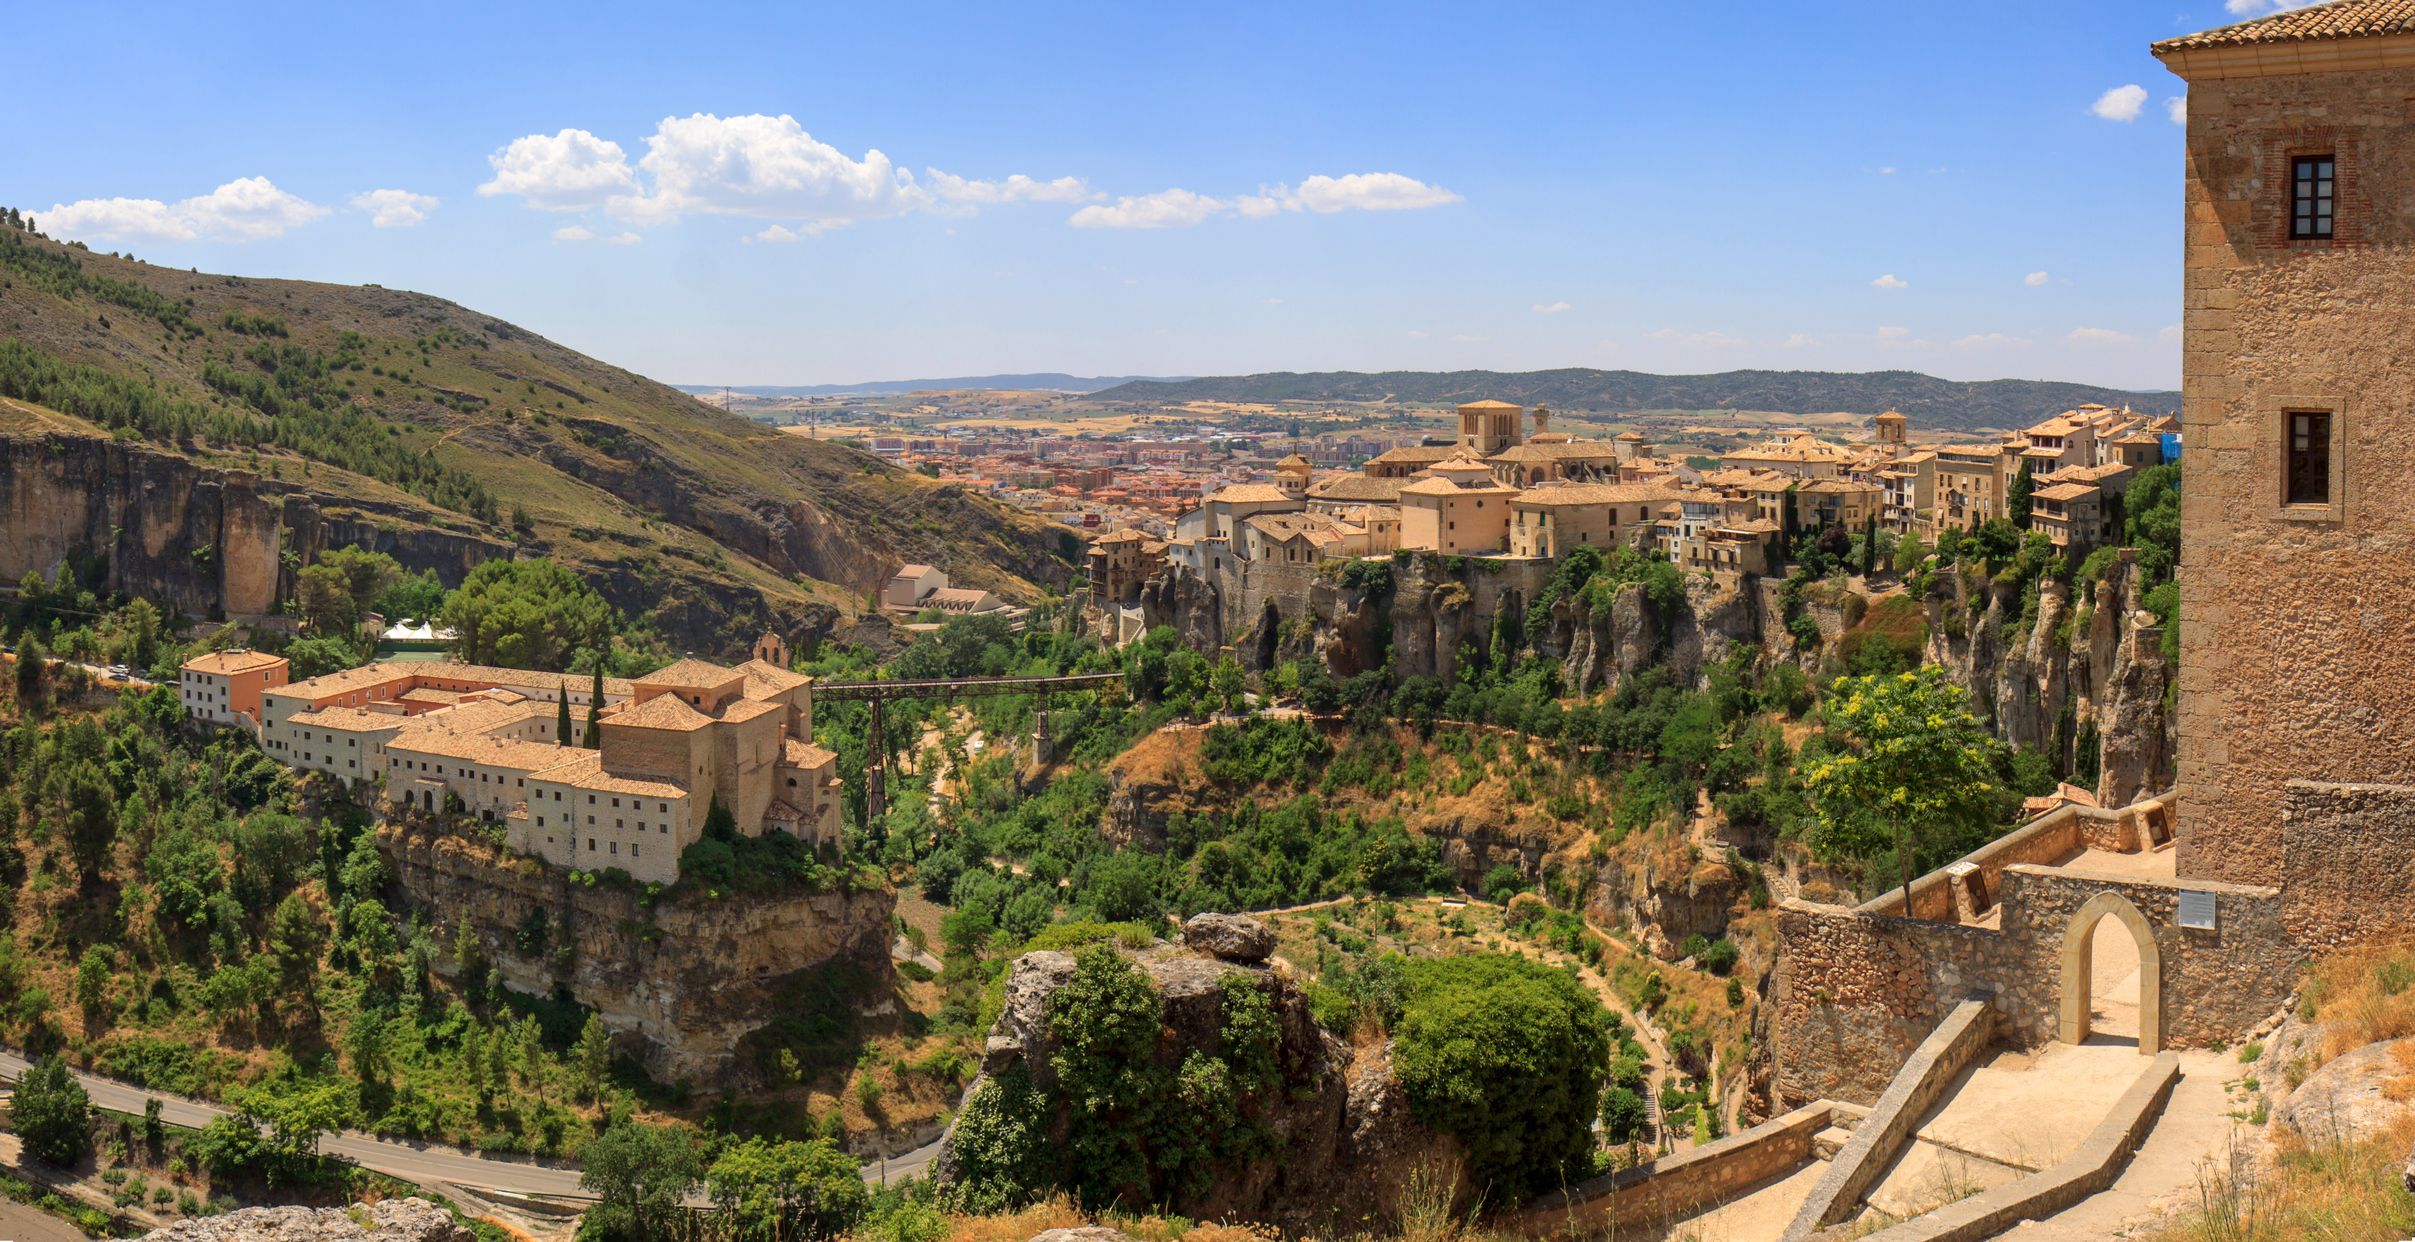 Panorama-of-monastry-and-old-town-of-Cuenca,-Spain-597645306_2420x1244.jpeg